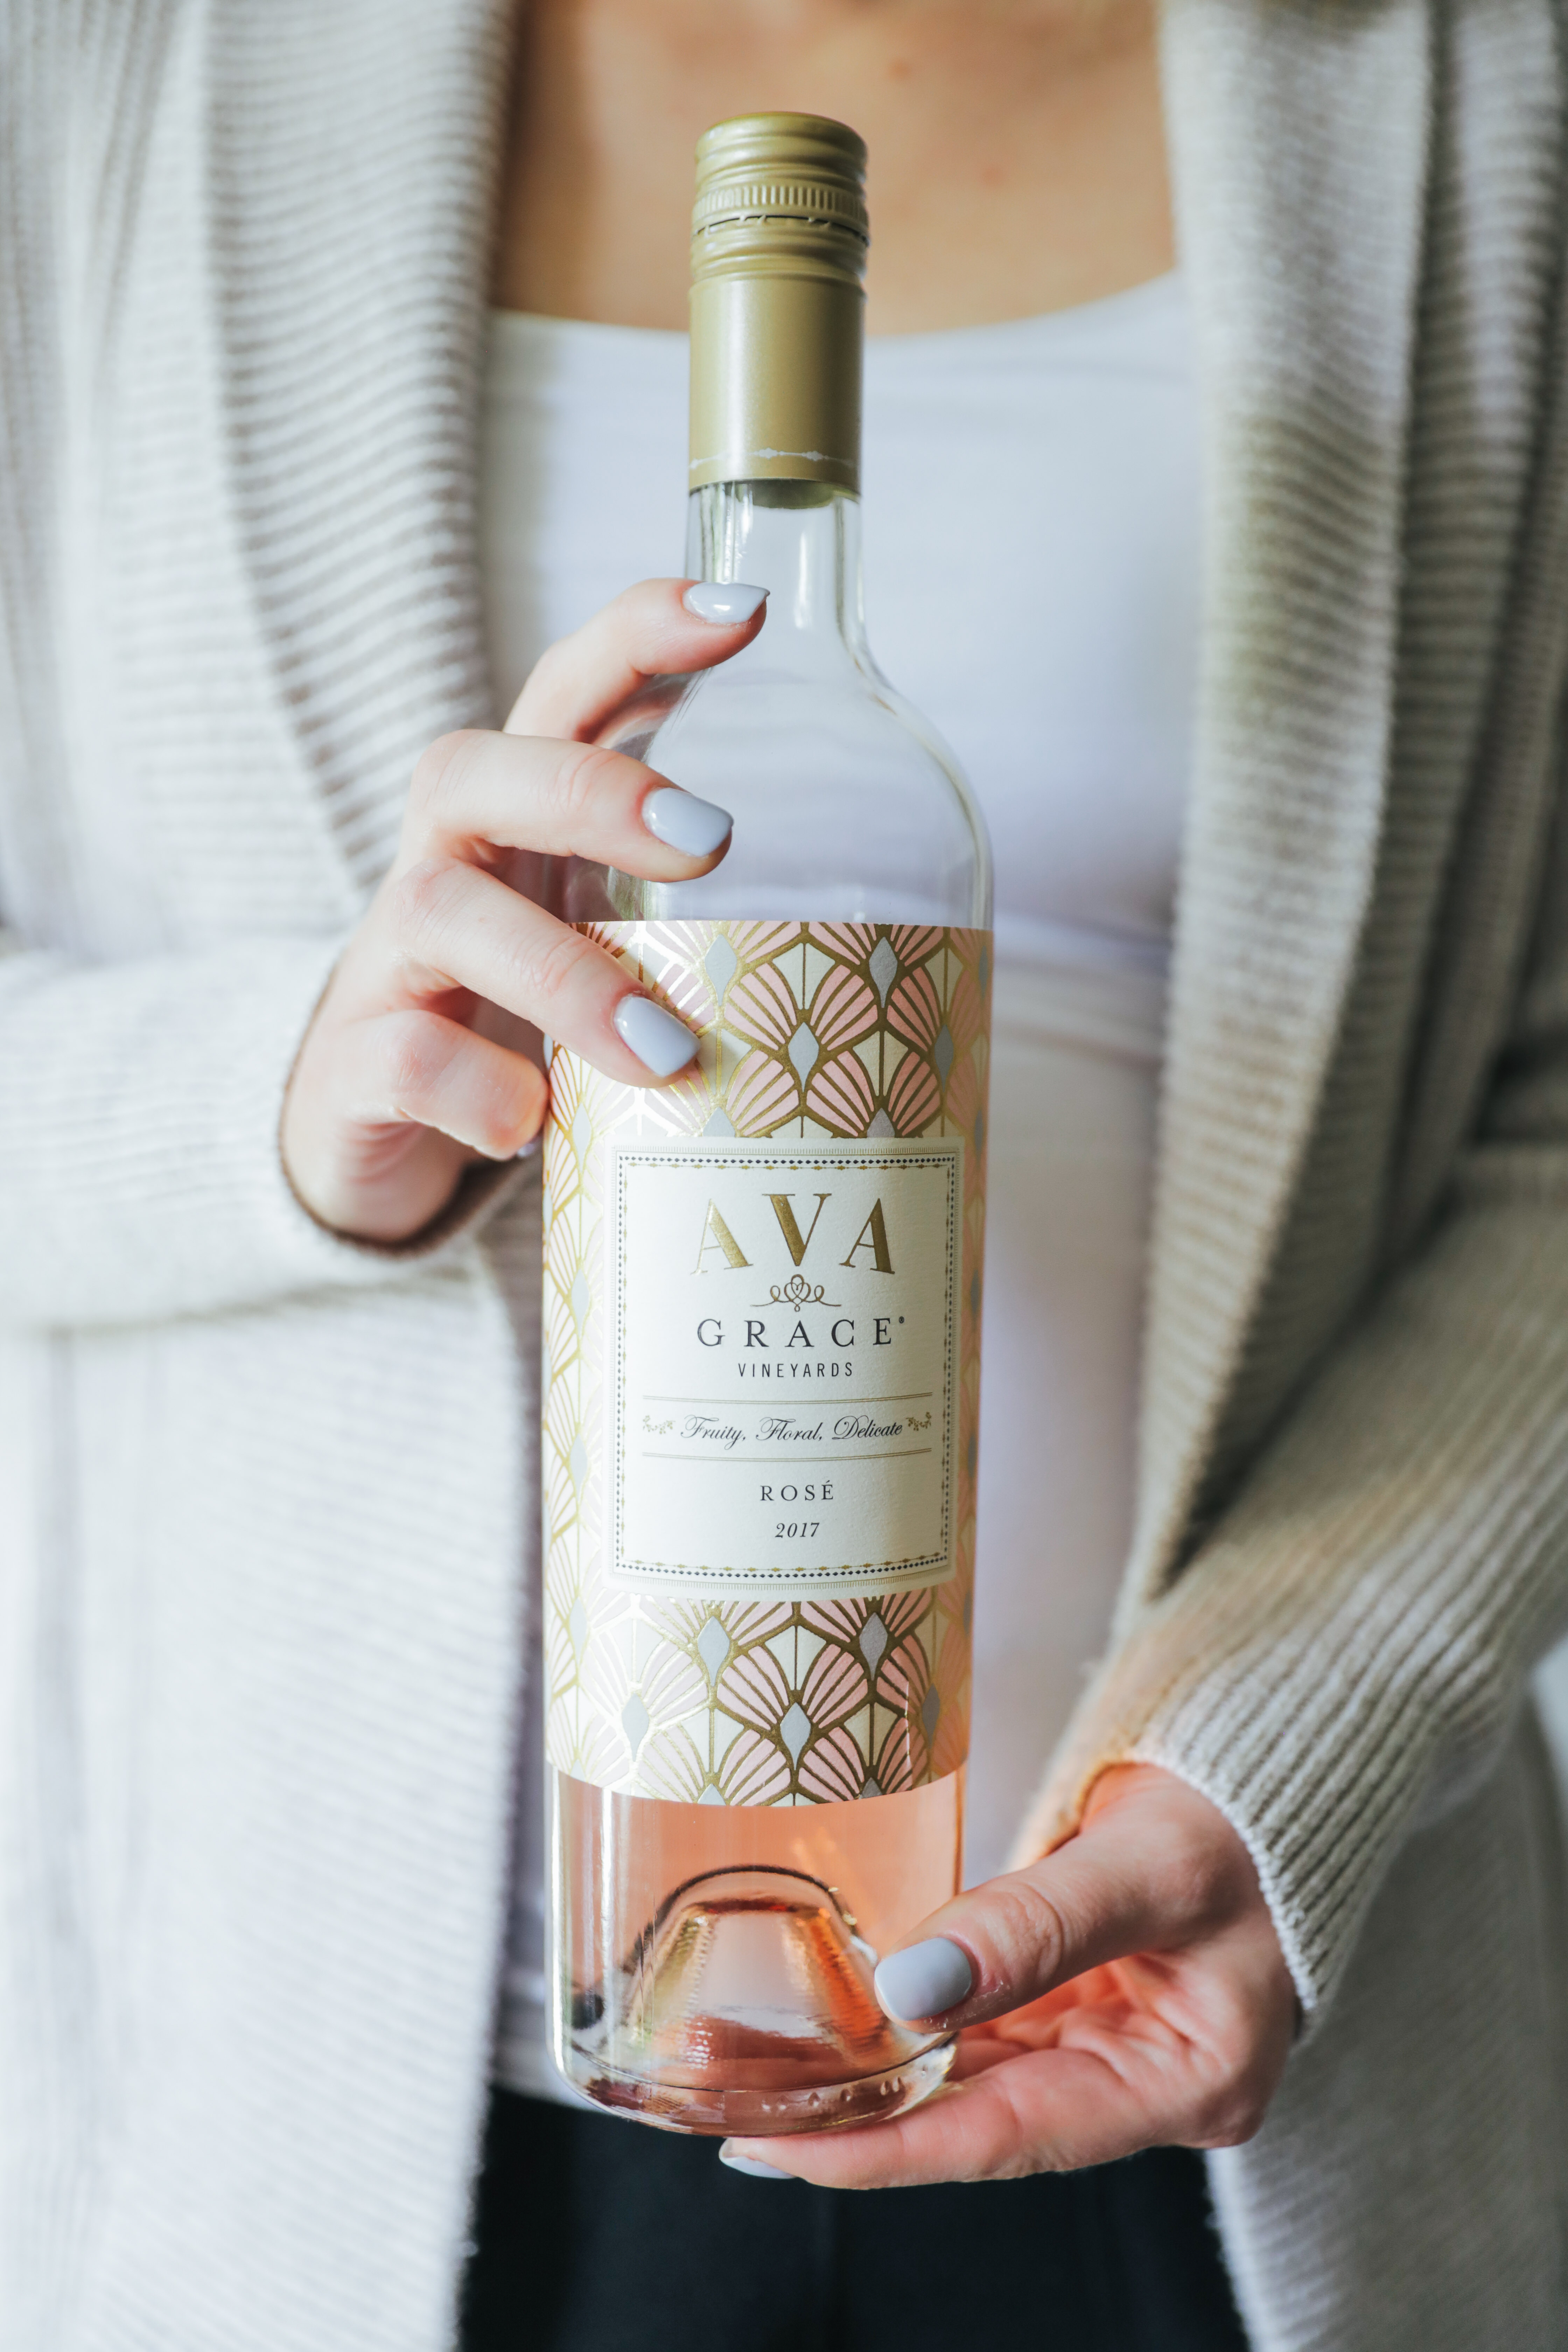 How To Host An At Home Spa Night with AVA Grace wine.